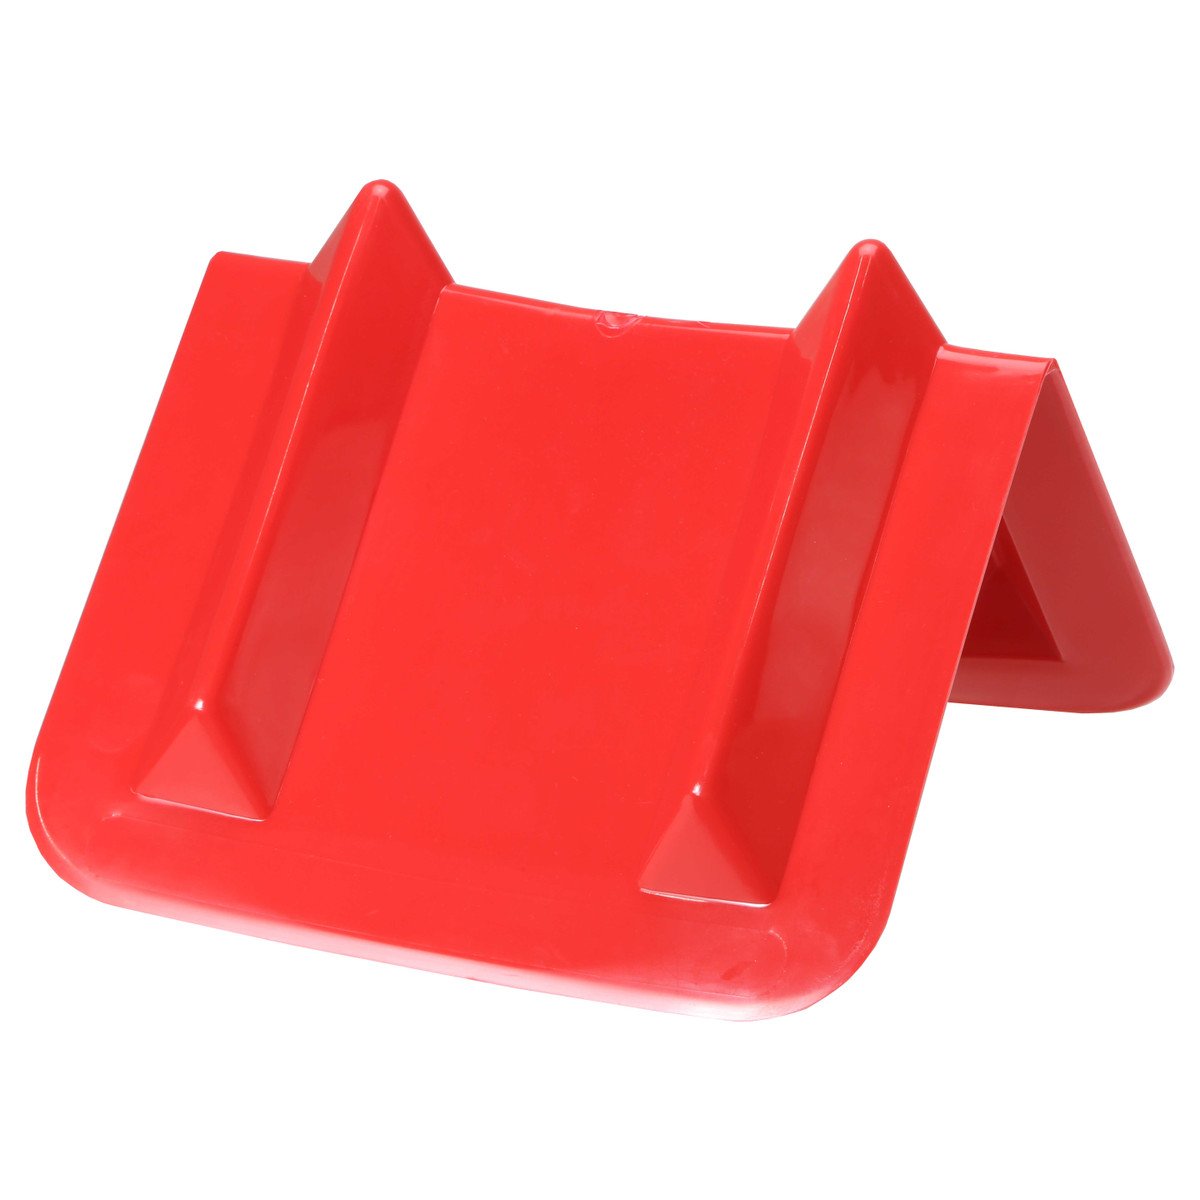 Corner Protector 11" Web Protector (9" x 9" x 11") - 20 Pack